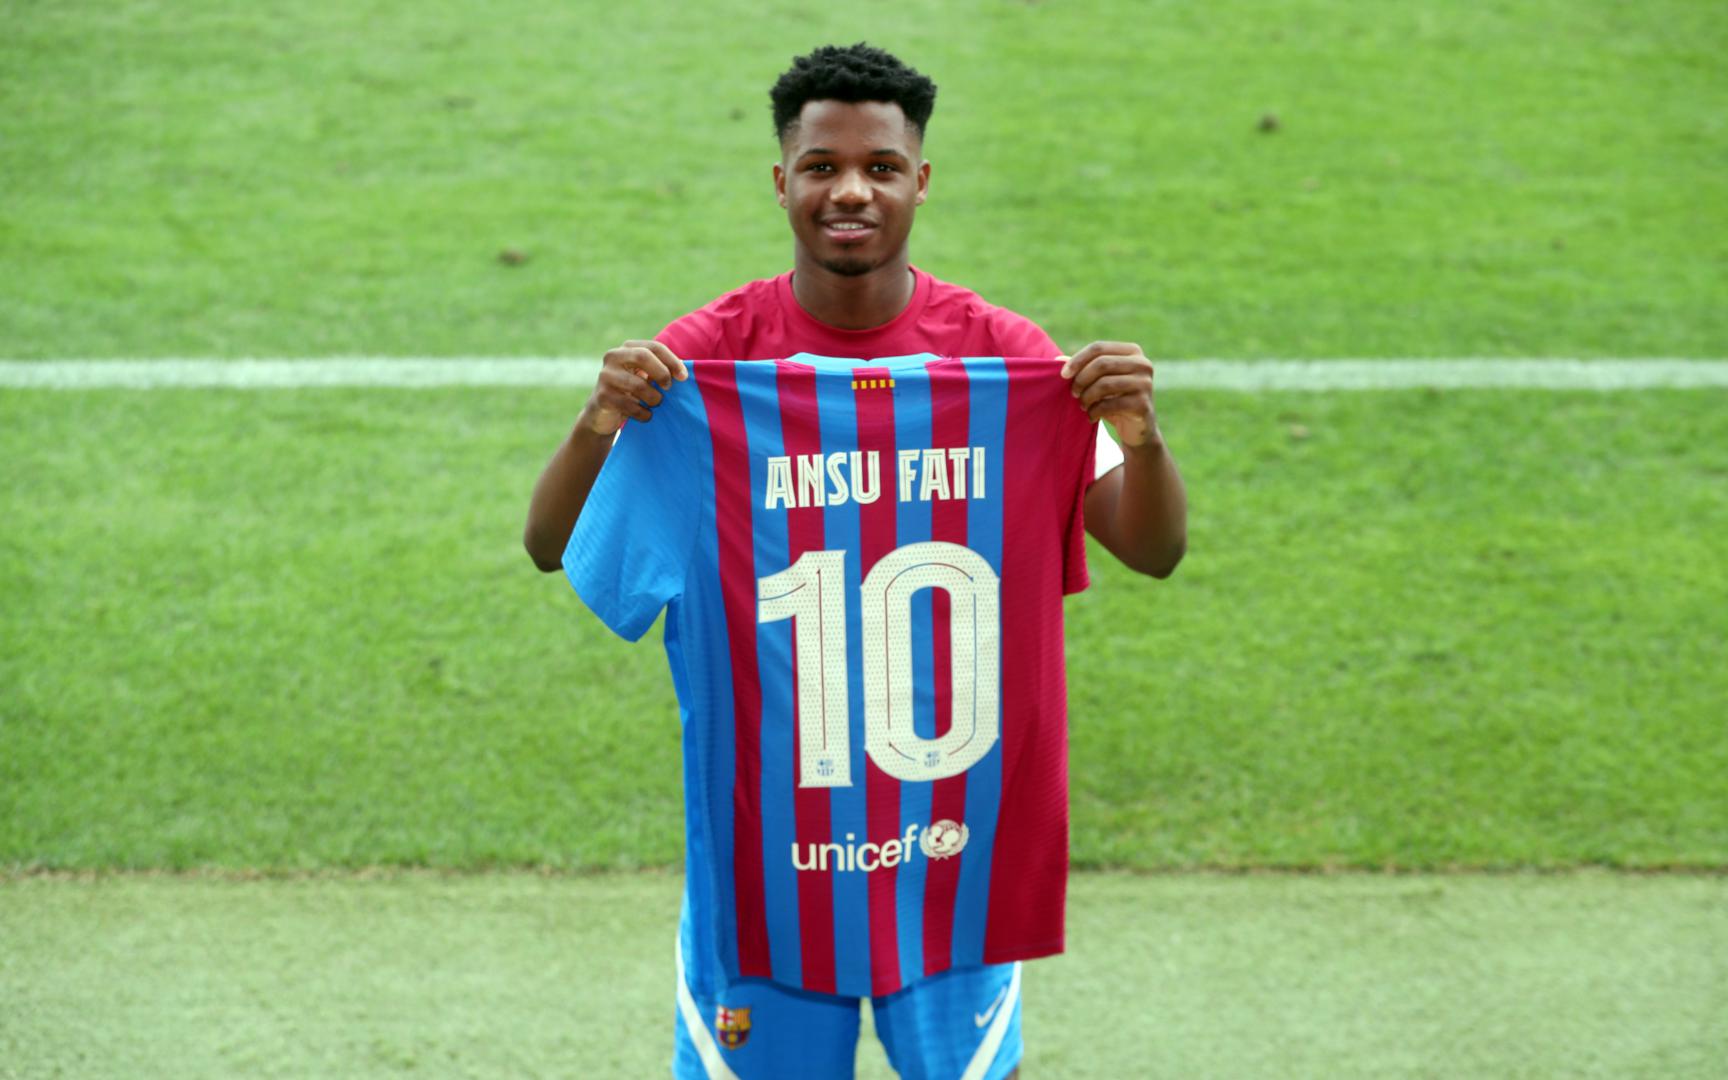 Ansu Fati To Wear The Number 10 Shirt